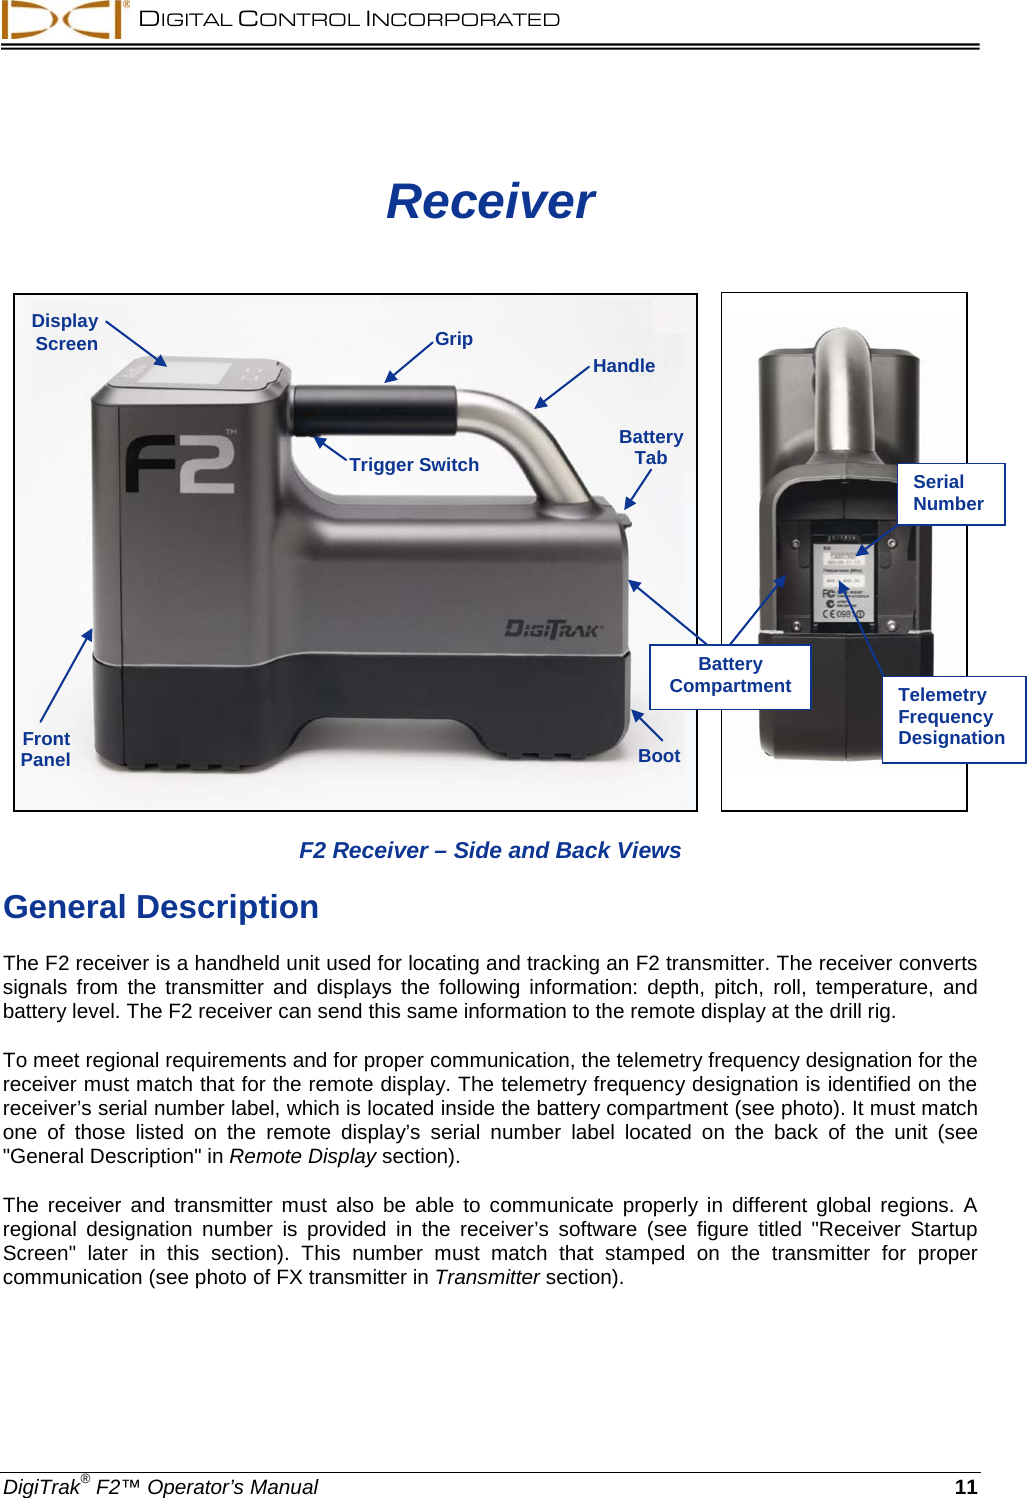  DIGITAL CONTROL INCORPORATED  DigiTrak® F2™ Operator’s Manual 11 Receiver        F2 Receiver – Side and Back Views General Description The F2 receiver is a handheld unit used for locating and tracking an F2 transmitter. The receiver converts signals from the transmitter and displays the following information: depth, pitch, roll, temperature, and battery level. The F2 receiver can send this same information to the remote display at the drill rig. To meet regional requirements and for proper communication, the telemetry frequency designation for the receiver must match that for the remote display. The telemetry frequency designation is identified on the receiver’s serial number label, which is located inside the battery compartment (see photo). It must match one of those listed on the remote display’s serial number label  located on the back of the unit (see &quot;General Description&quot; in Remote Display section). The receiver and transmitter must also be able to communicate properly in different global regions. A regional  designation number is provided in the receiver’s software (see figure titled &quot;Receiver Startup Screen&quot;  later in this section). This number must match that stamped on the transmitter for proper communication (see photo of FX transmitter in Transmitter section). Trigger Switch Front Panel Boot Battery Tab Display Screen Handle Grip Serial Number Telemetry Frequency Designation Battery Compartment 